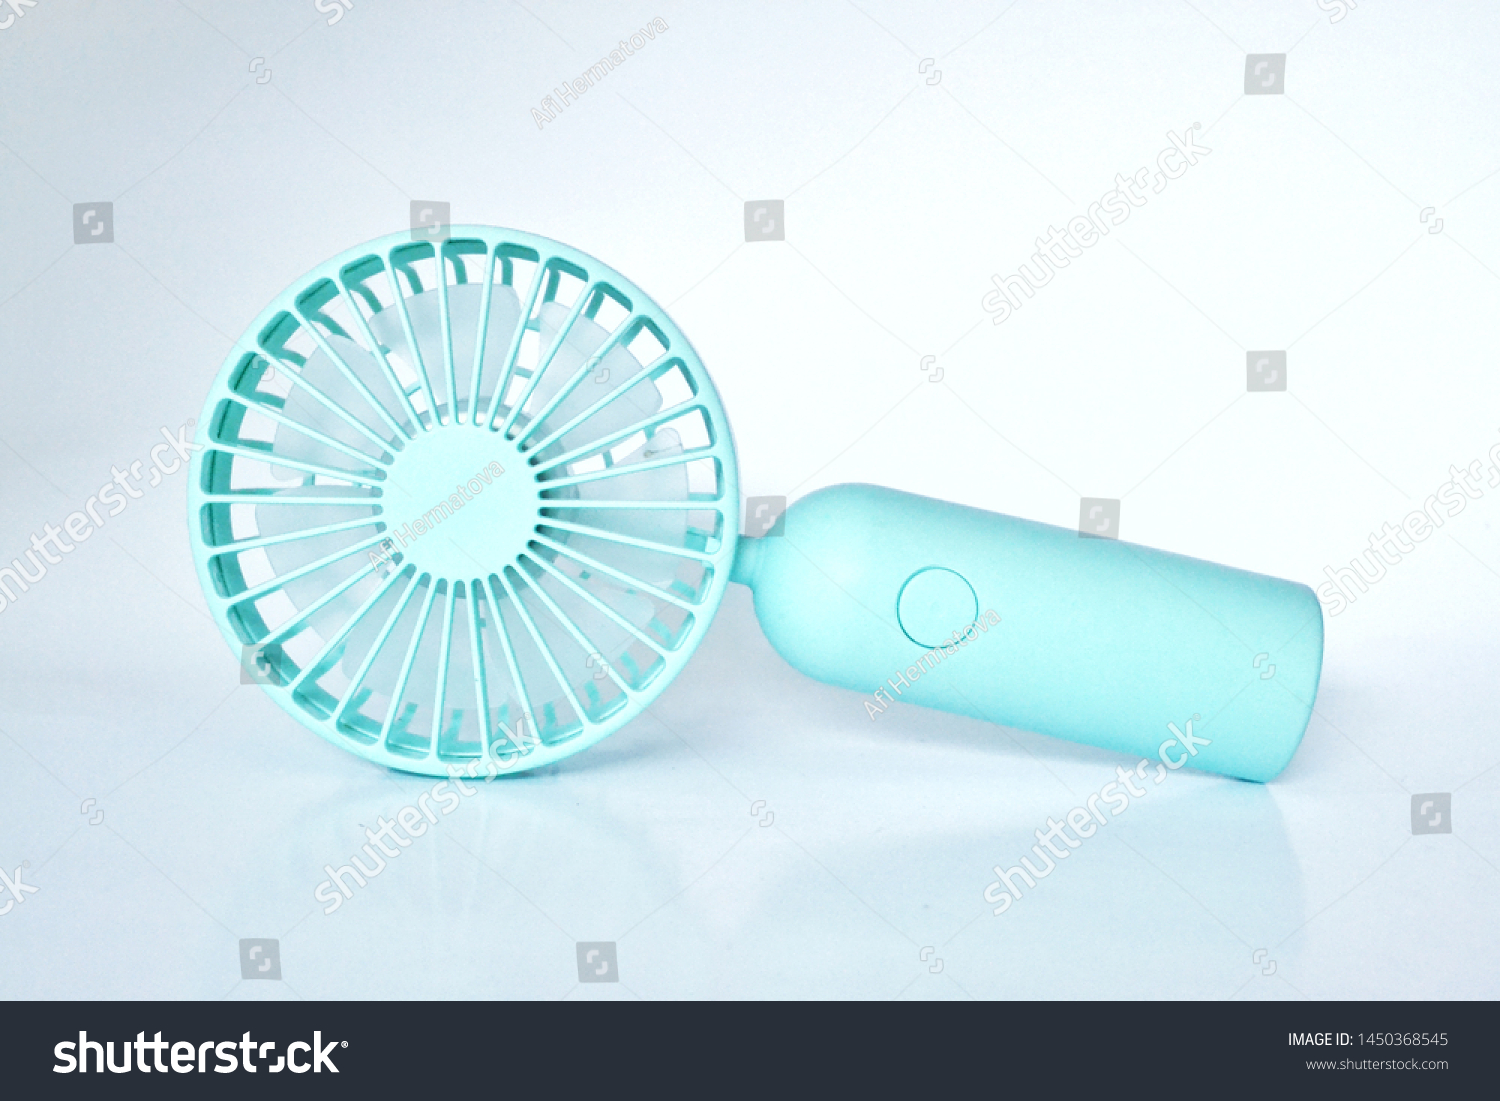 Portable rechargeable mini fans. Portable fans that can be easily carried everywhere. Close-up of tosca portable fans.  #1450368545